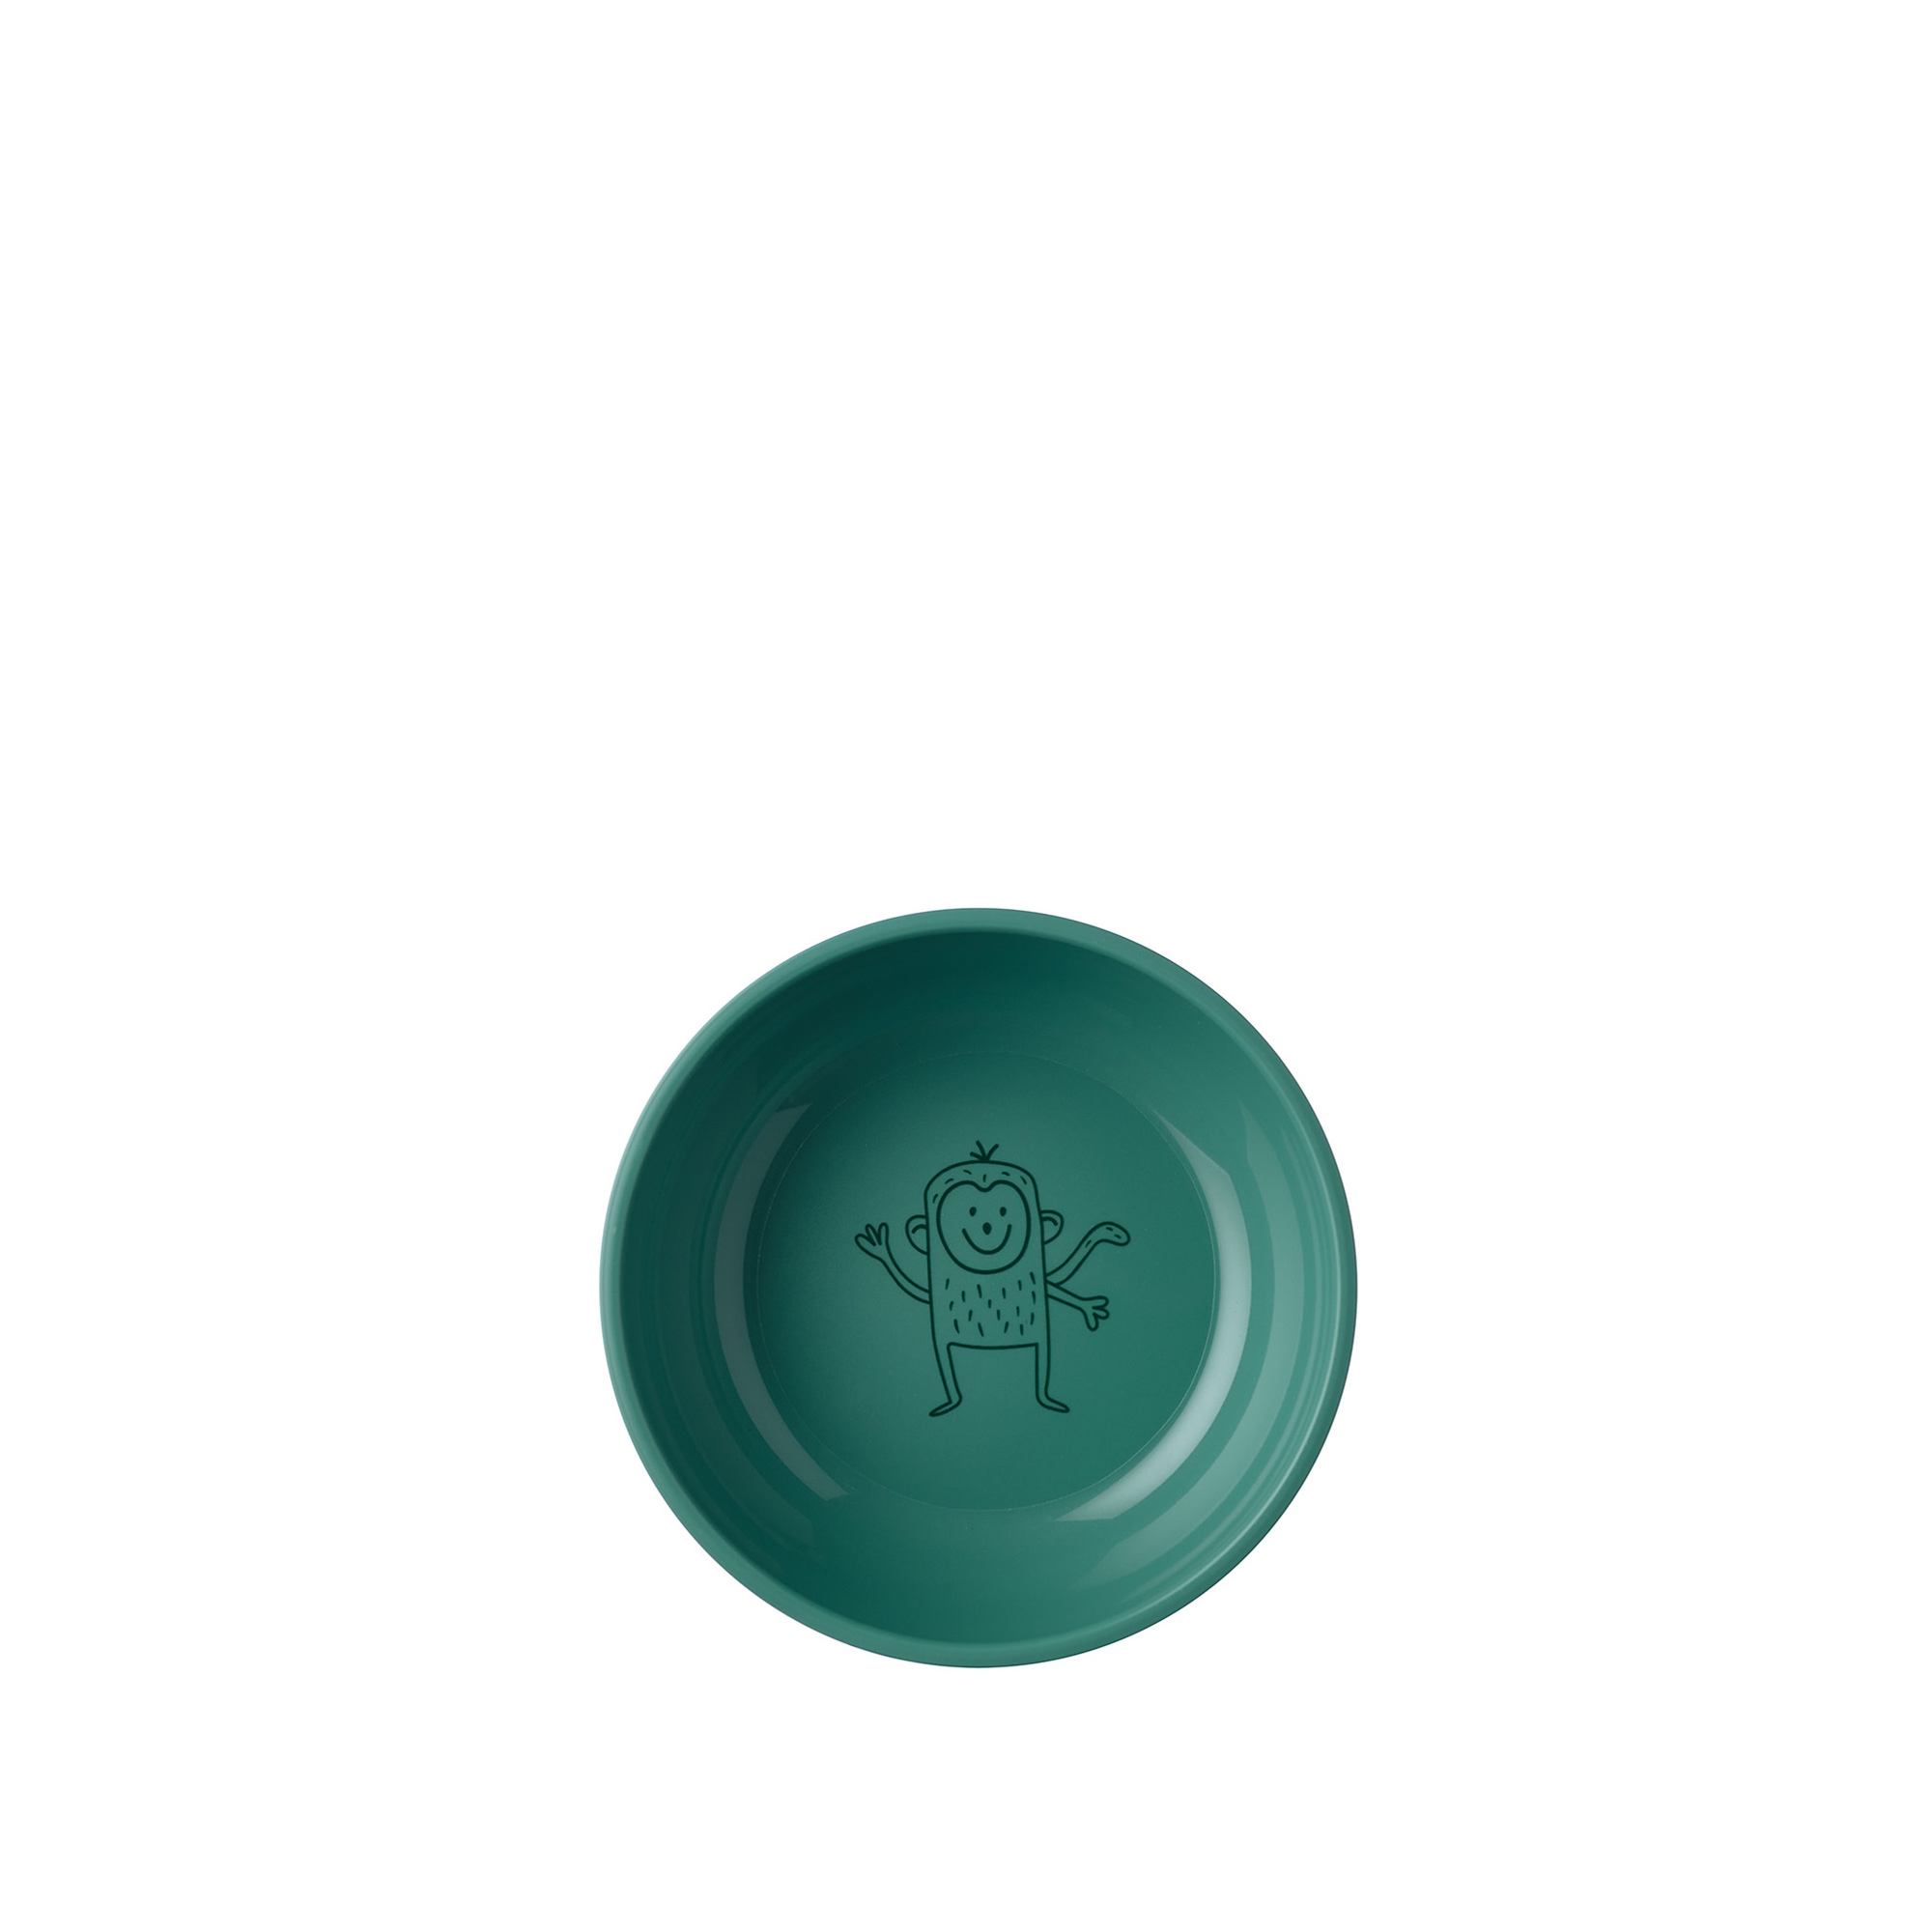 Mepal - Mio children's bowl - different colors and motifs